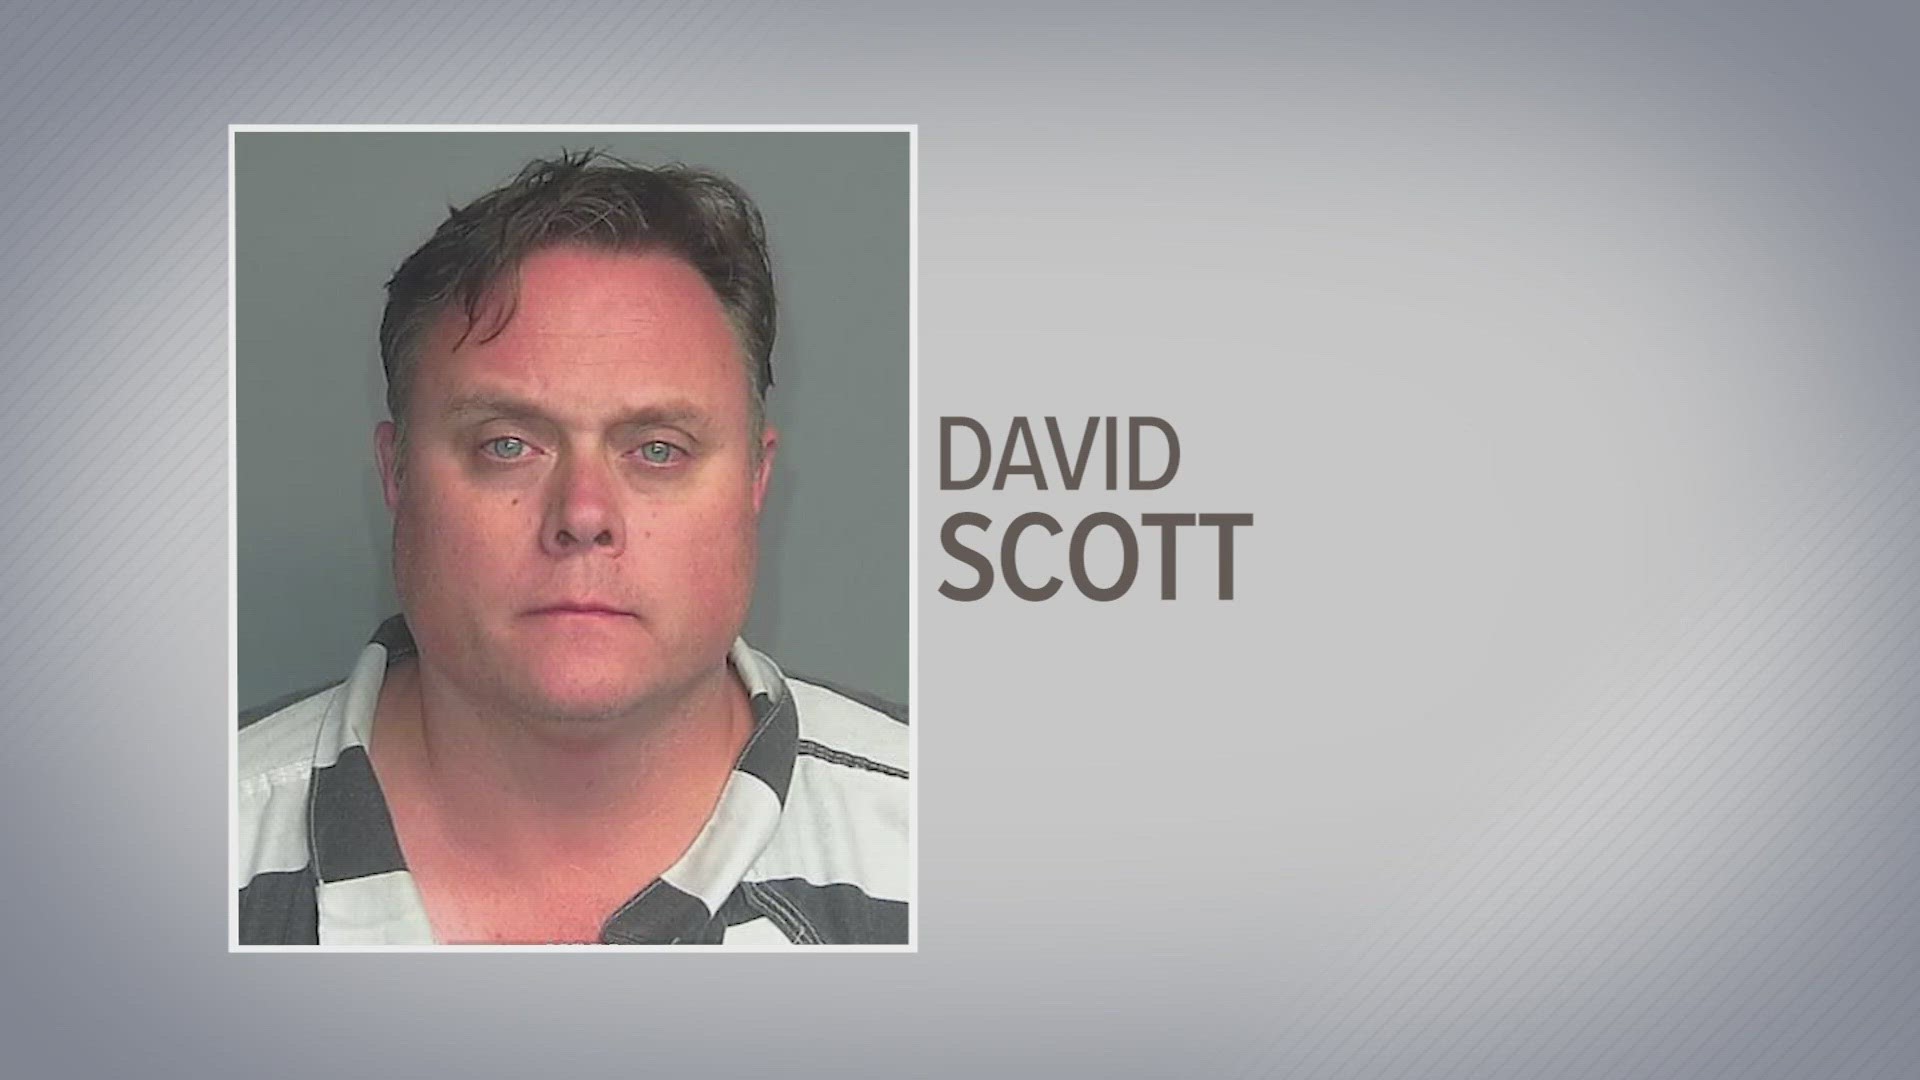 David Scott, a senior vice president with ExxonMobil, was arrested at a hotel off FM 1488 last week, jail records show. He's been charged with sexual assault.